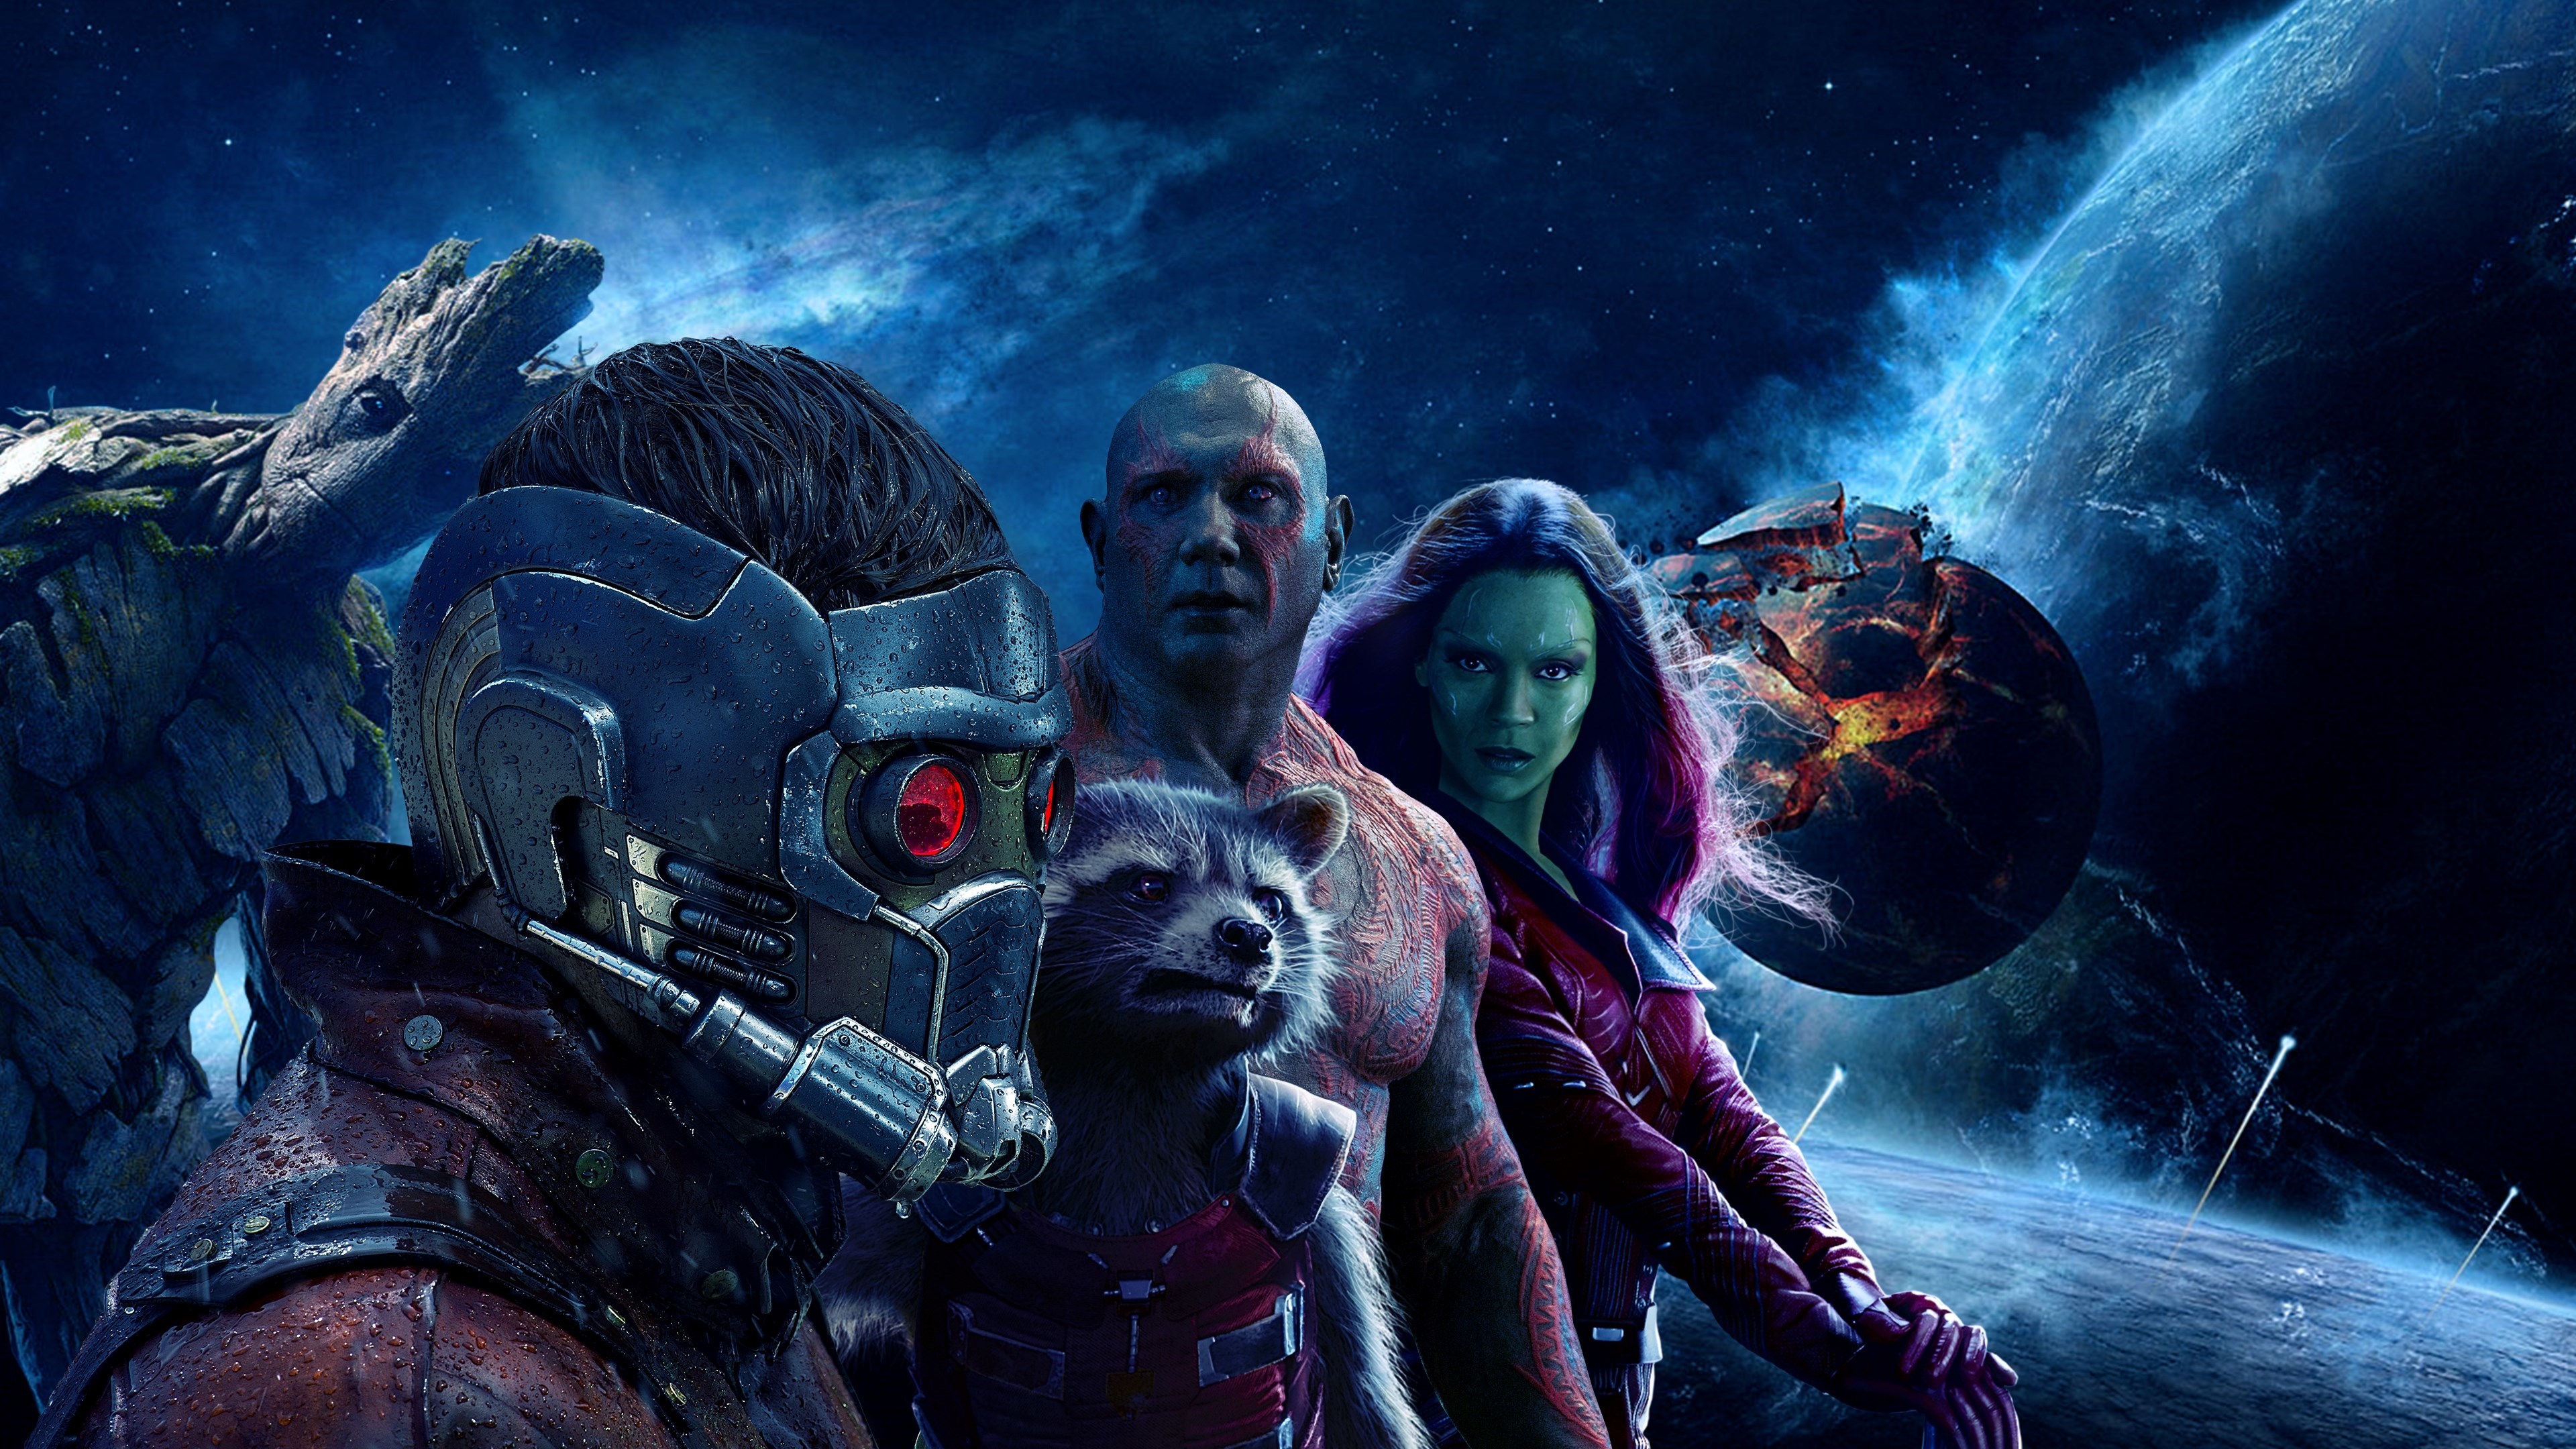 Dave Bautista Drax The Destroyer Gamora Groot Guardians Of The Galaxy Peter Quill Rocket Raccoon Sta 3840x2160